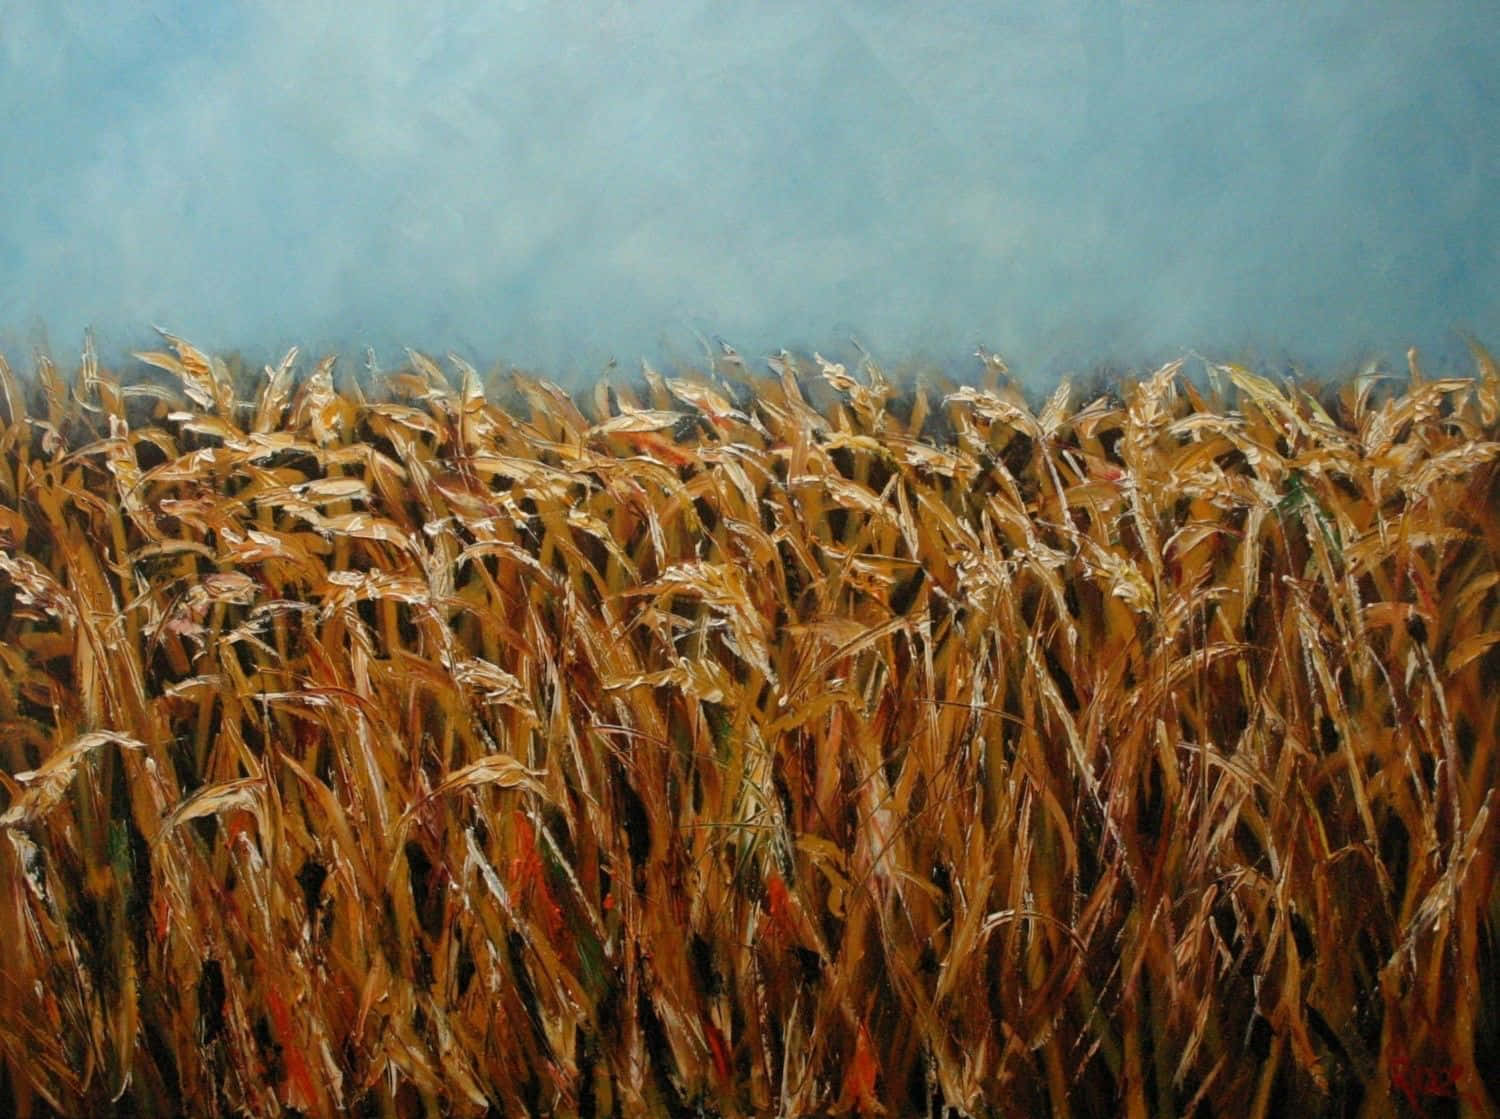 A field of wheat swaying in the summer breeze, a symbol of nature's abundance.